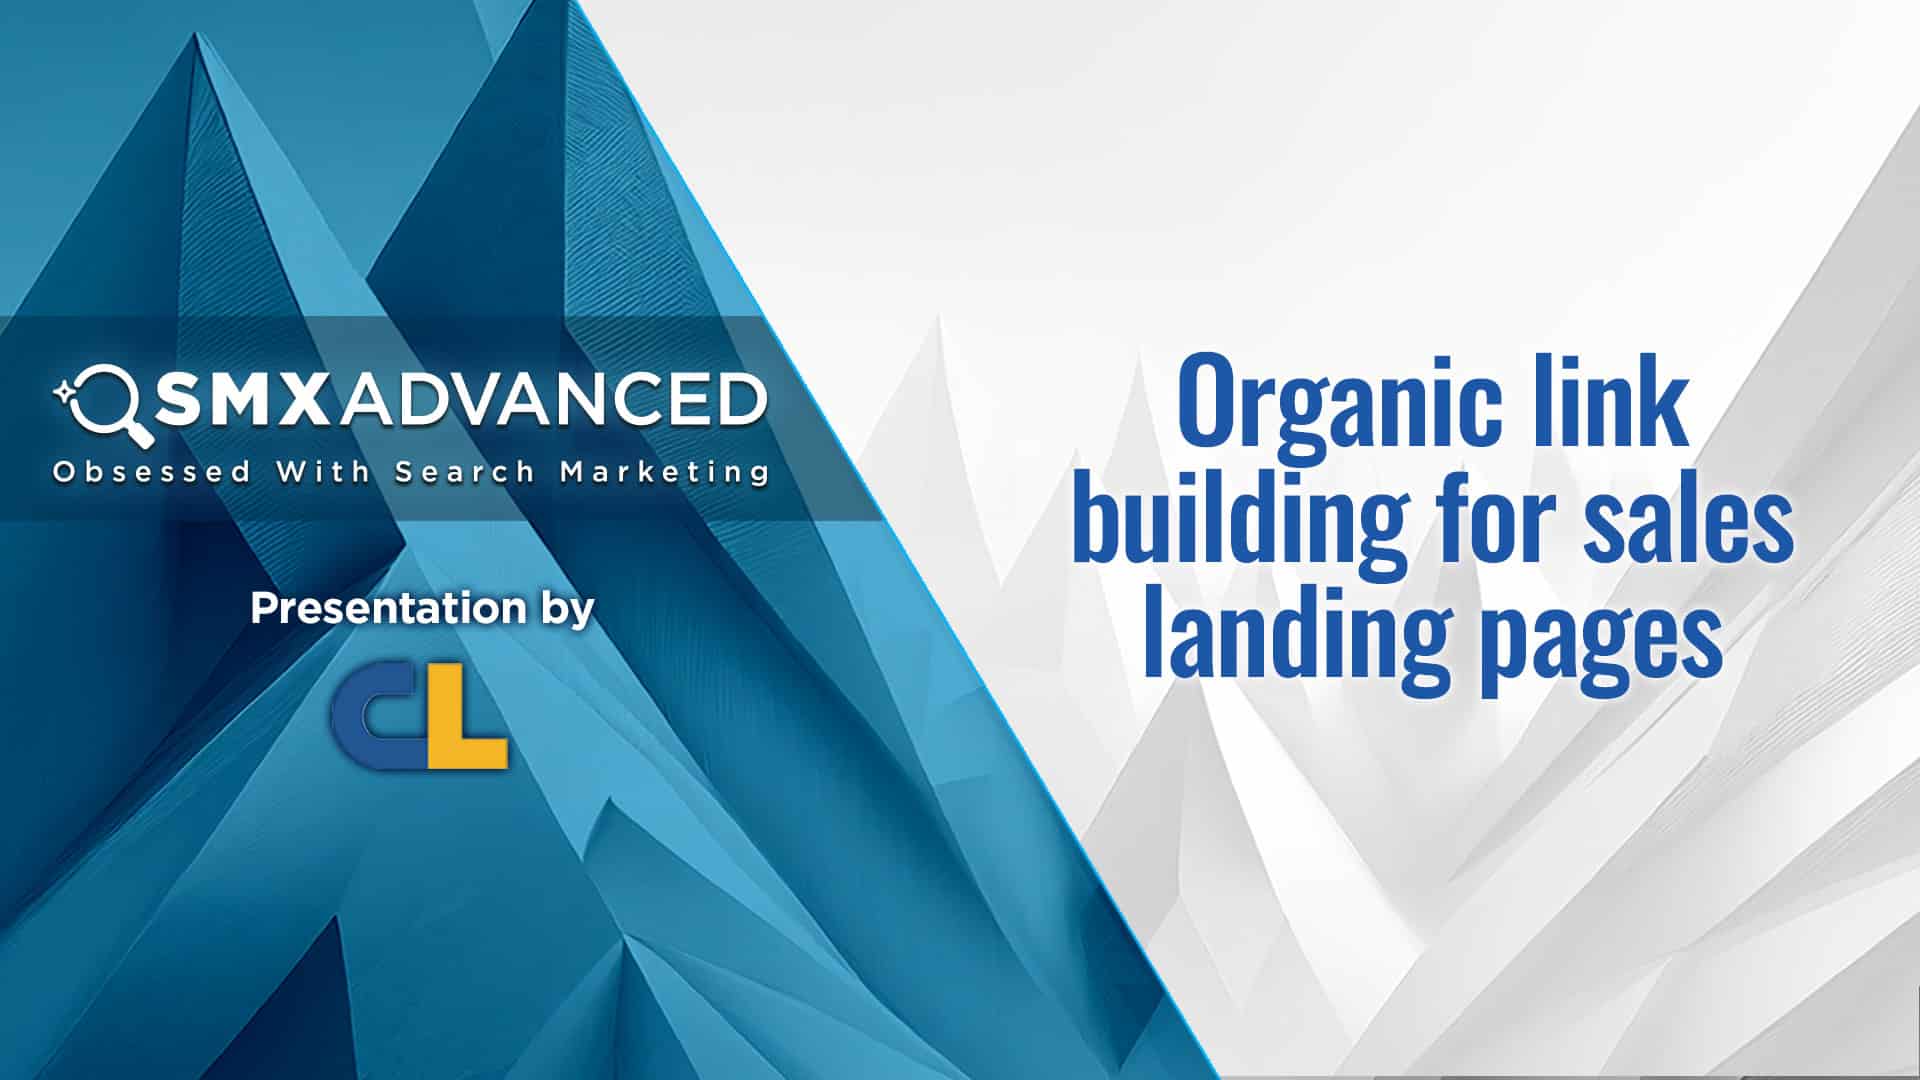 Organic link building for sales landing pages